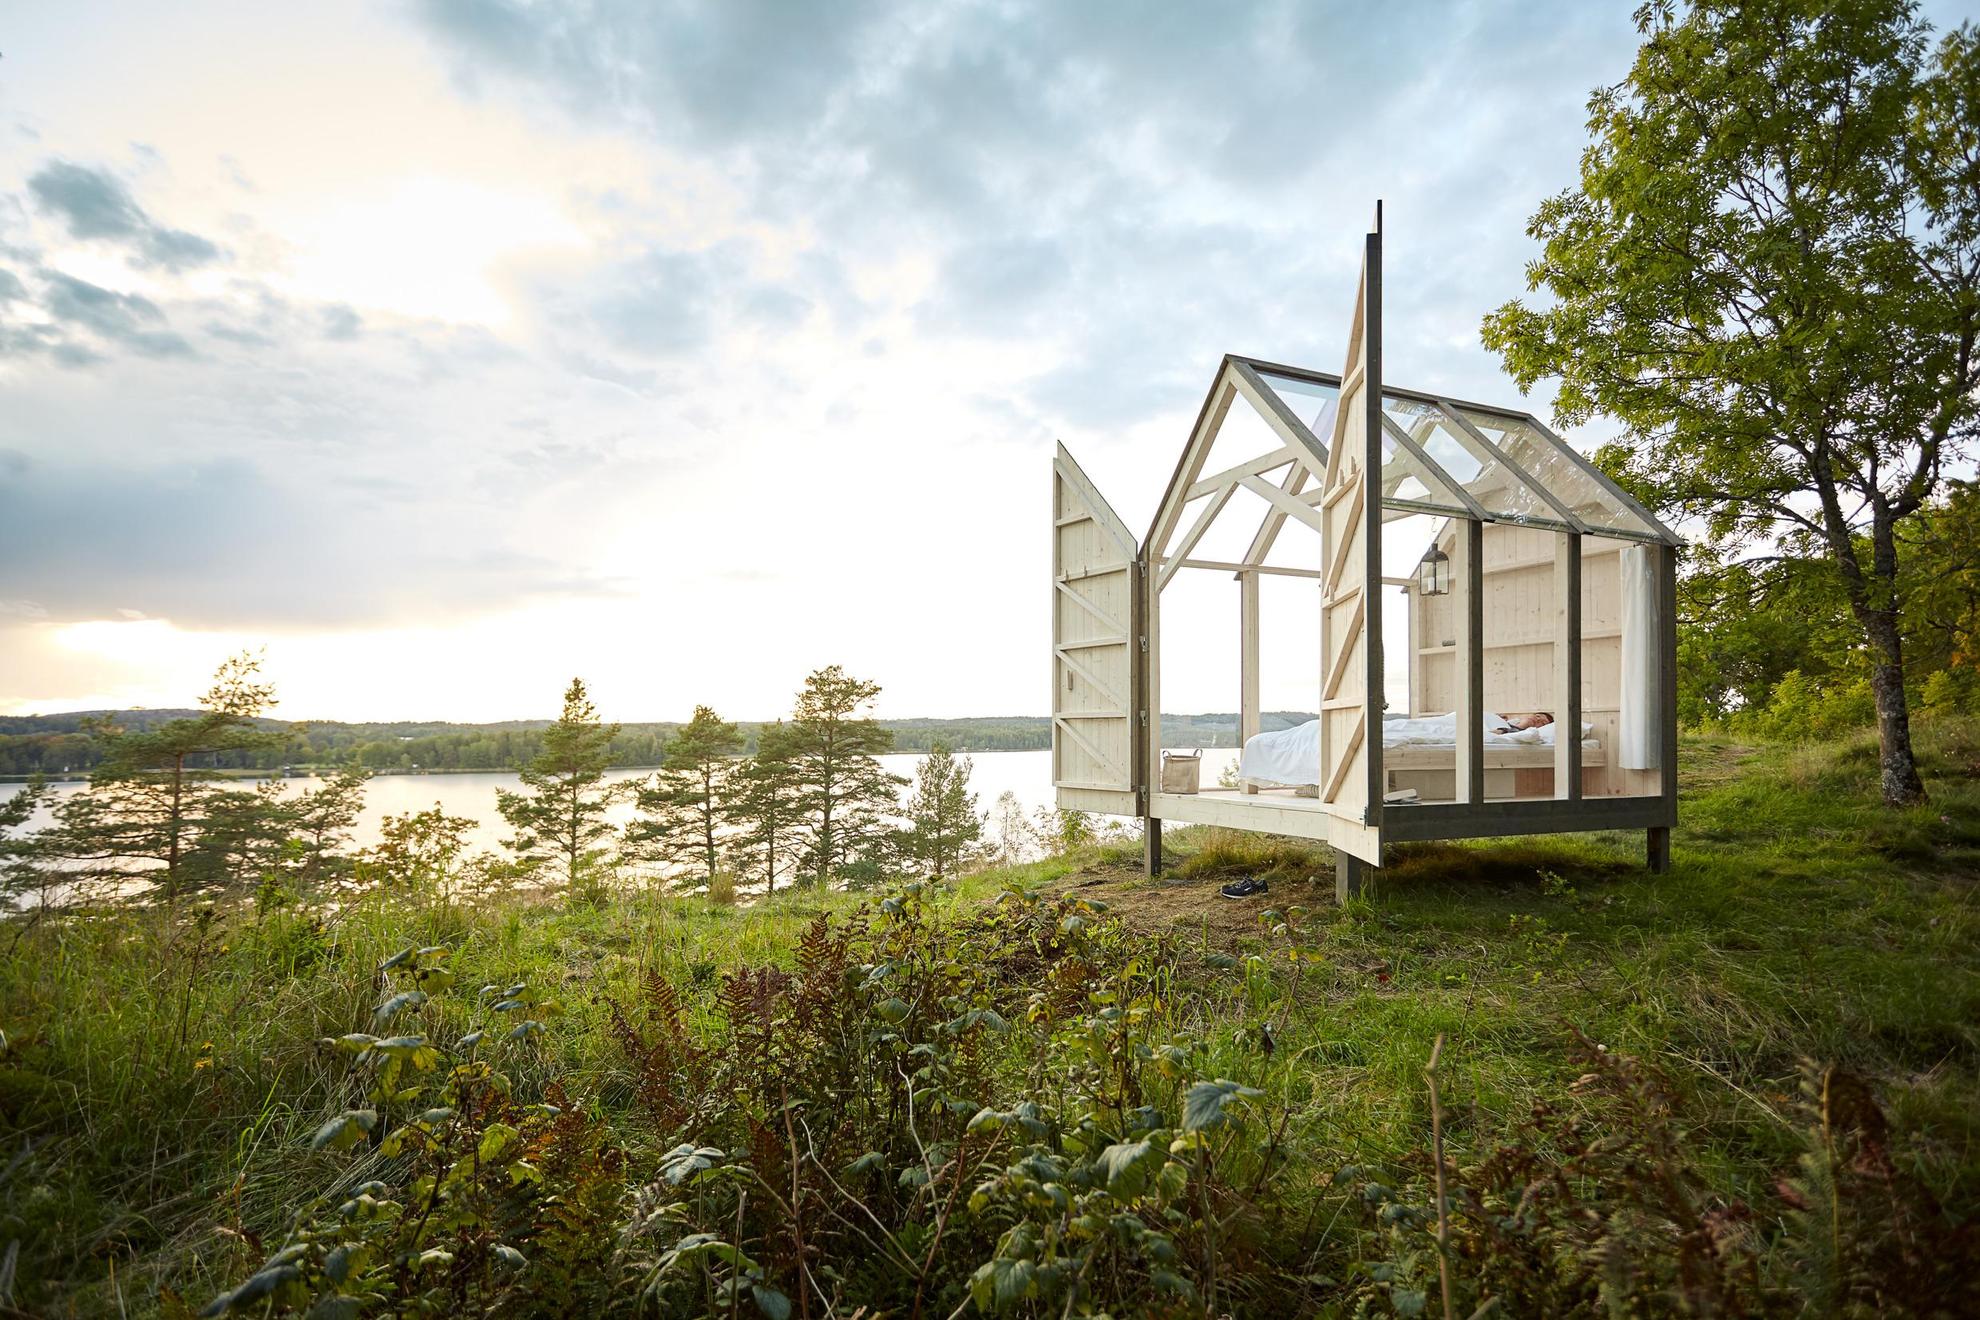 A glass cabin in nature, with doors wide open. Sea and forest in the distance.